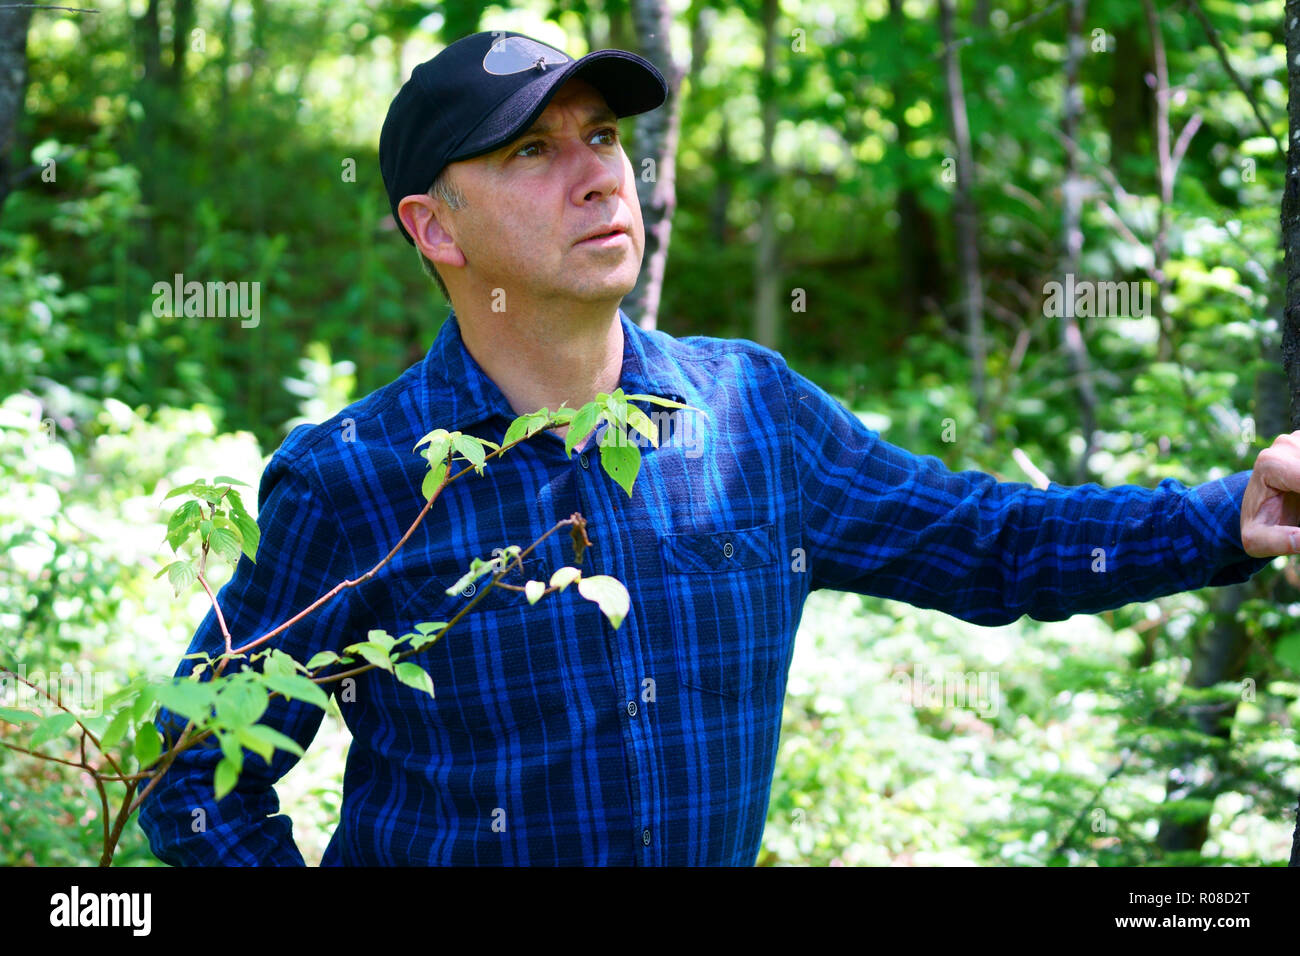 A caucasian curious man is looking away while hiking in the forest wearing a blue check shirt and a black hat. Stock Photo